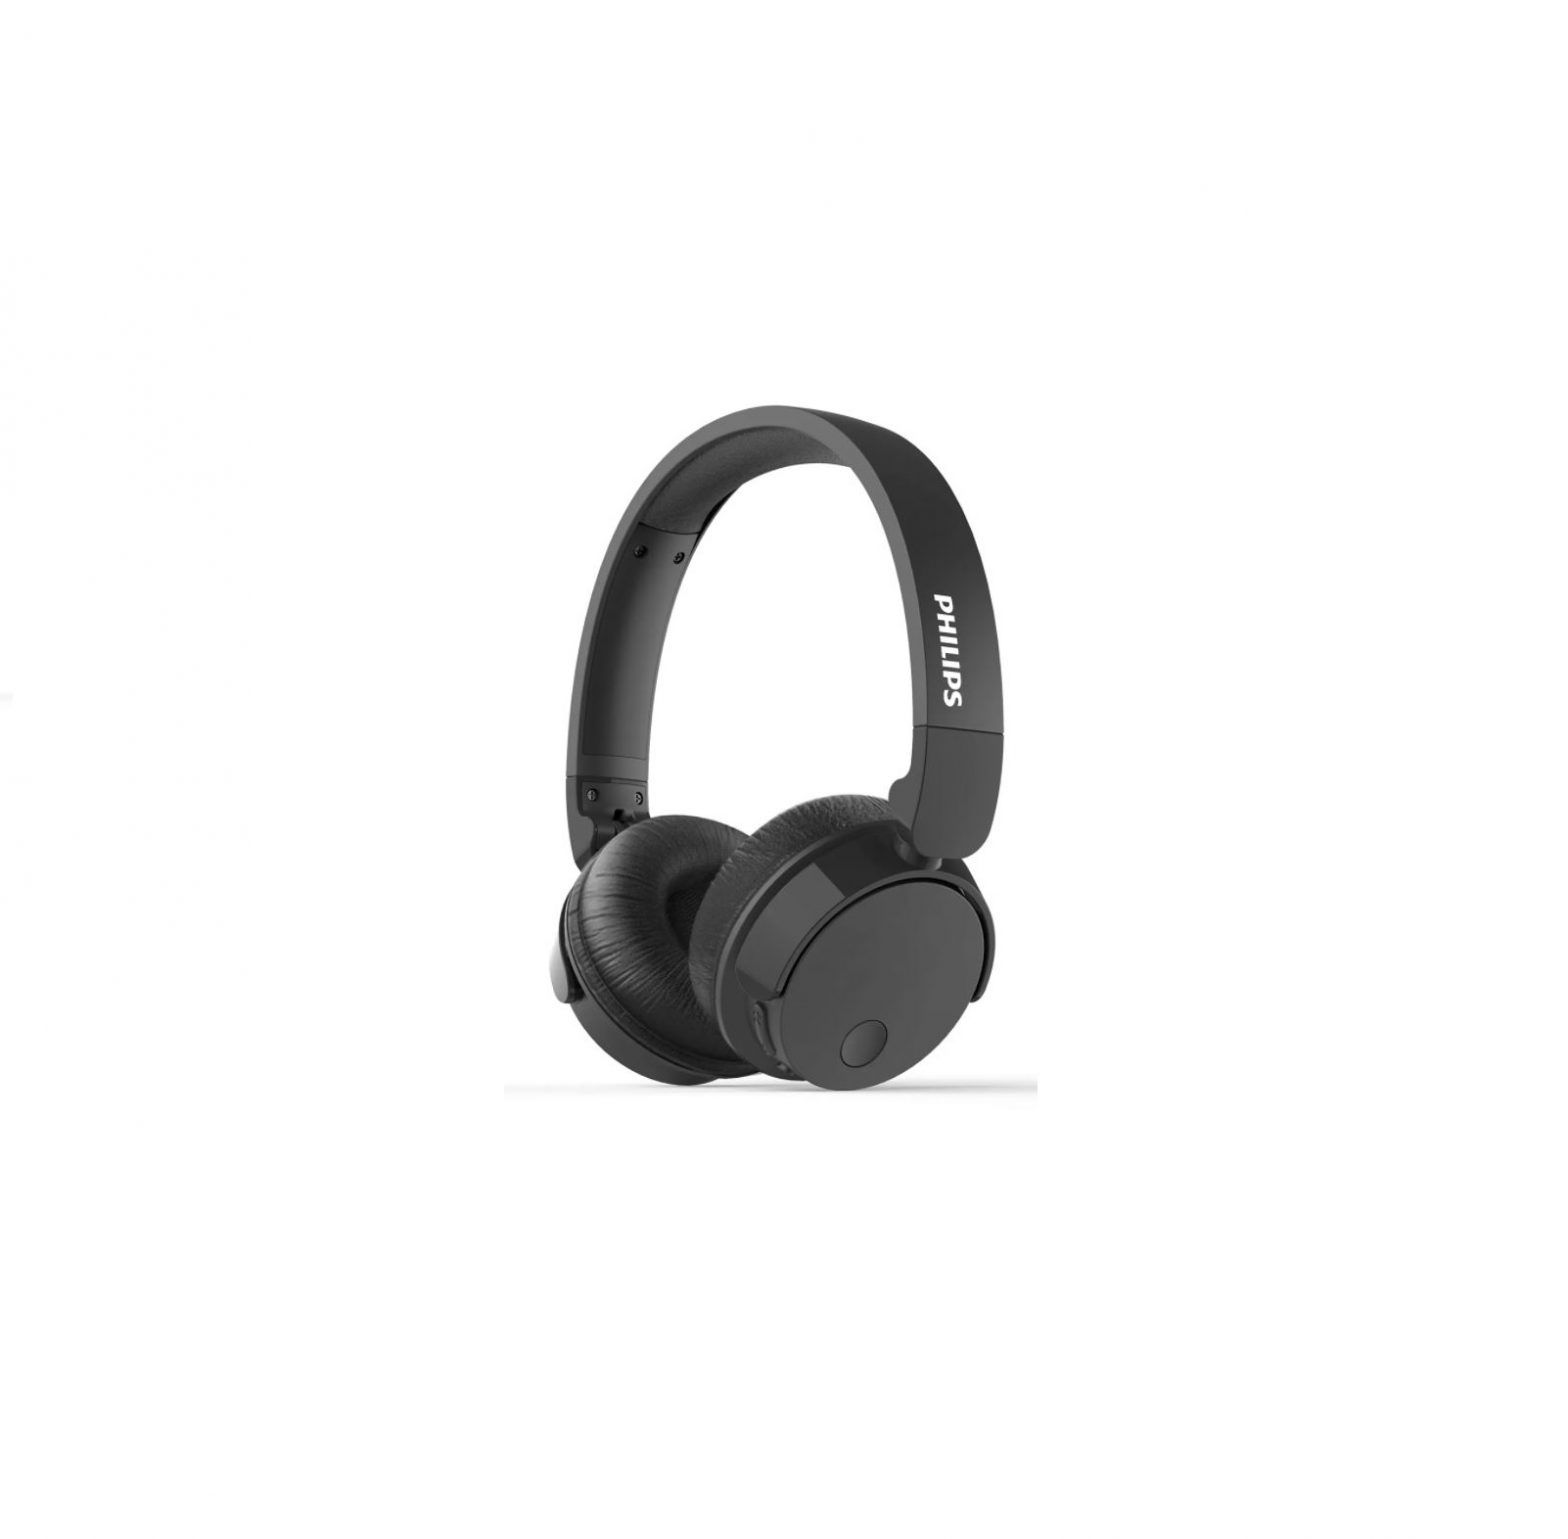 PHILIPS Wireless noise cancelling headphones 32mm drivers closed-back On-ear Instructions